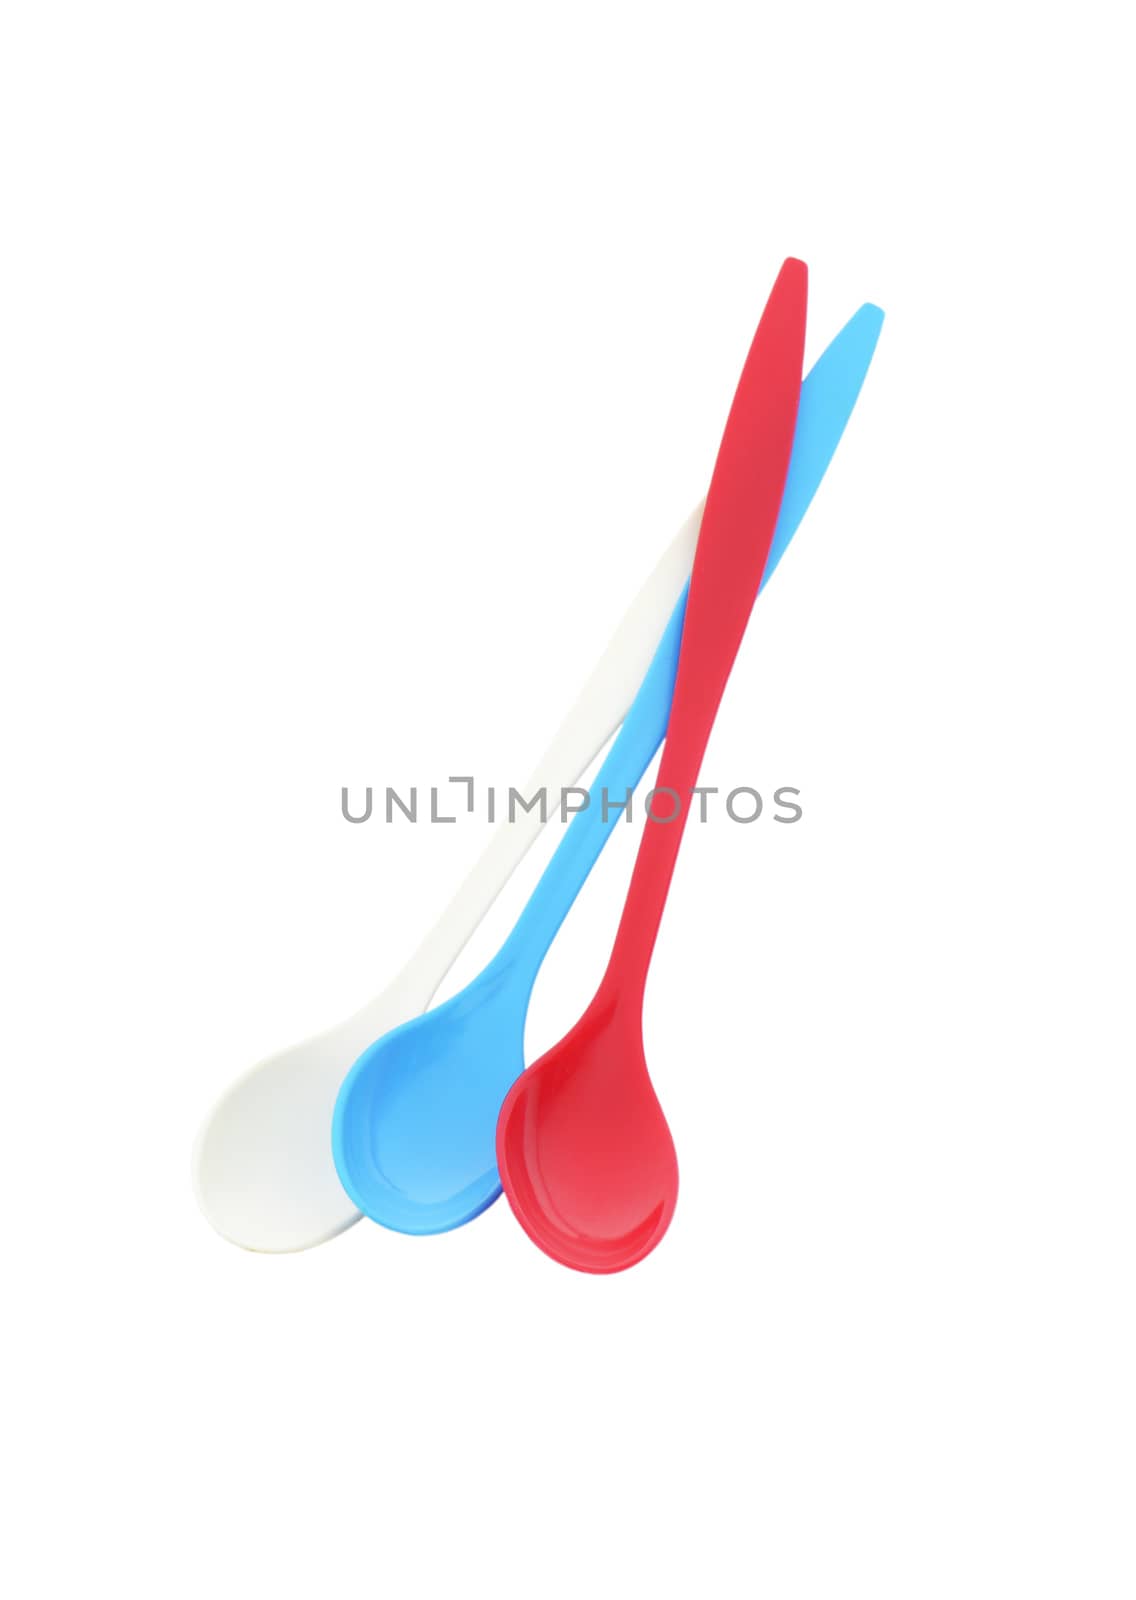 Three long plastic spoons by Digifoodstock